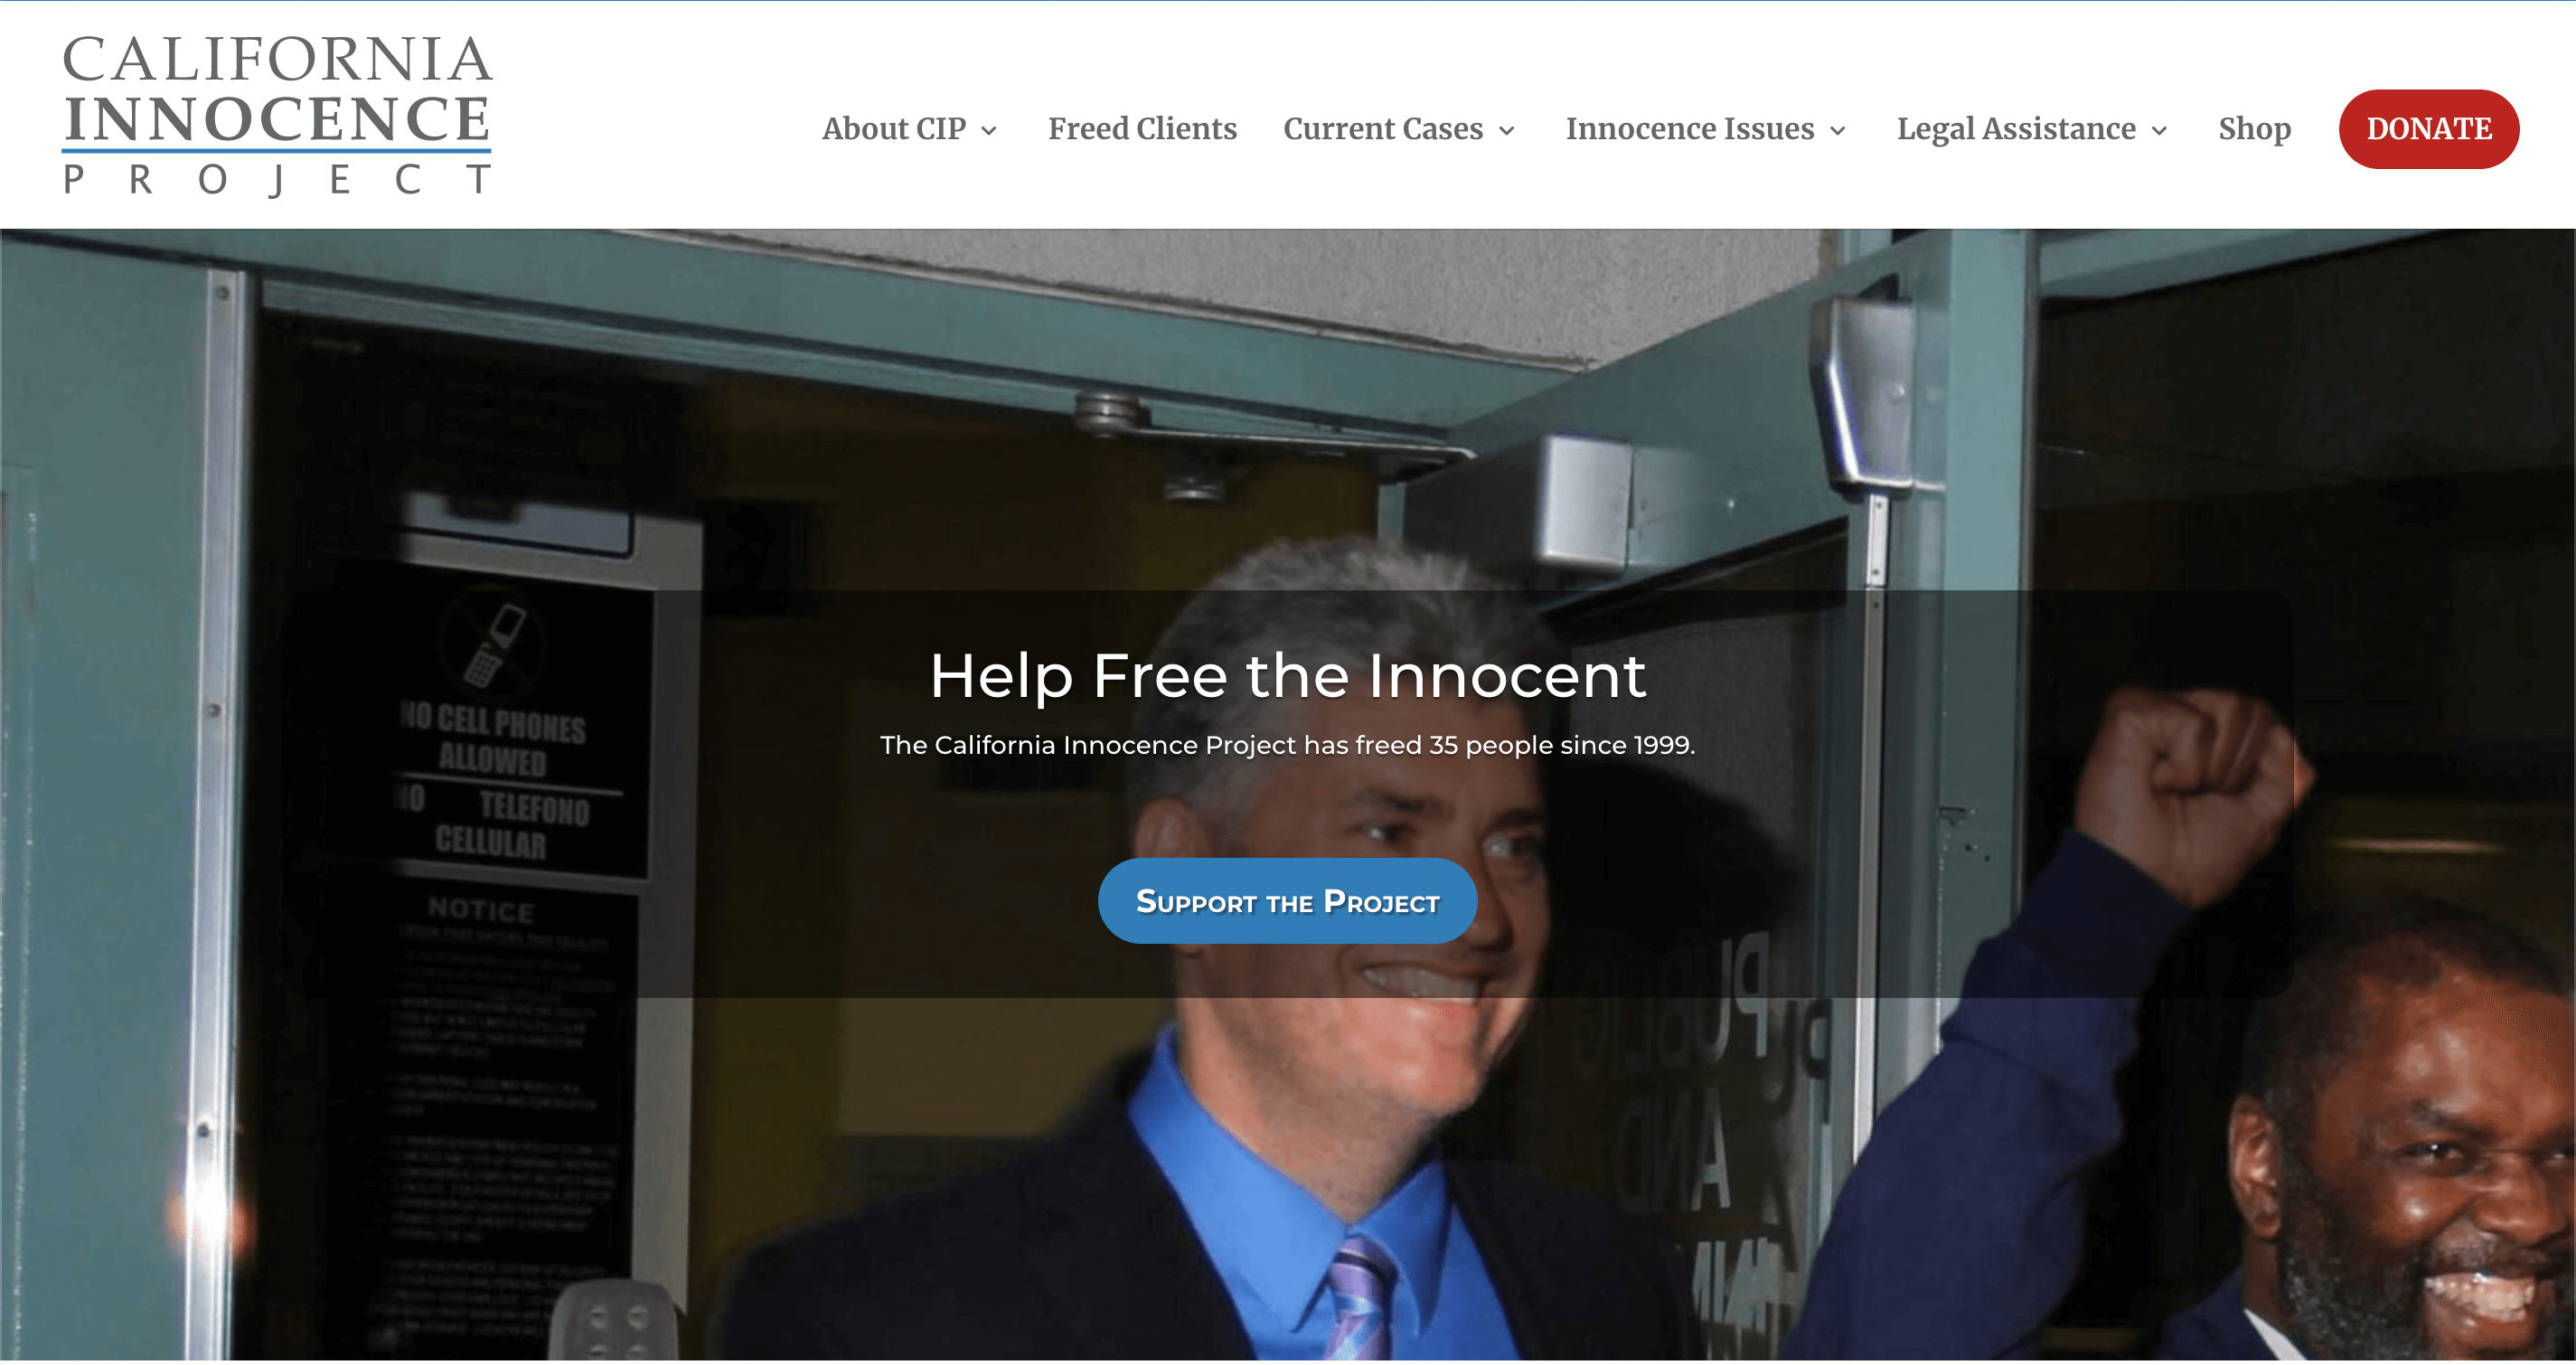 The California Innocence Project's homepage featuring a photo of an attorney with a client who is beaming and raising his fist in the air